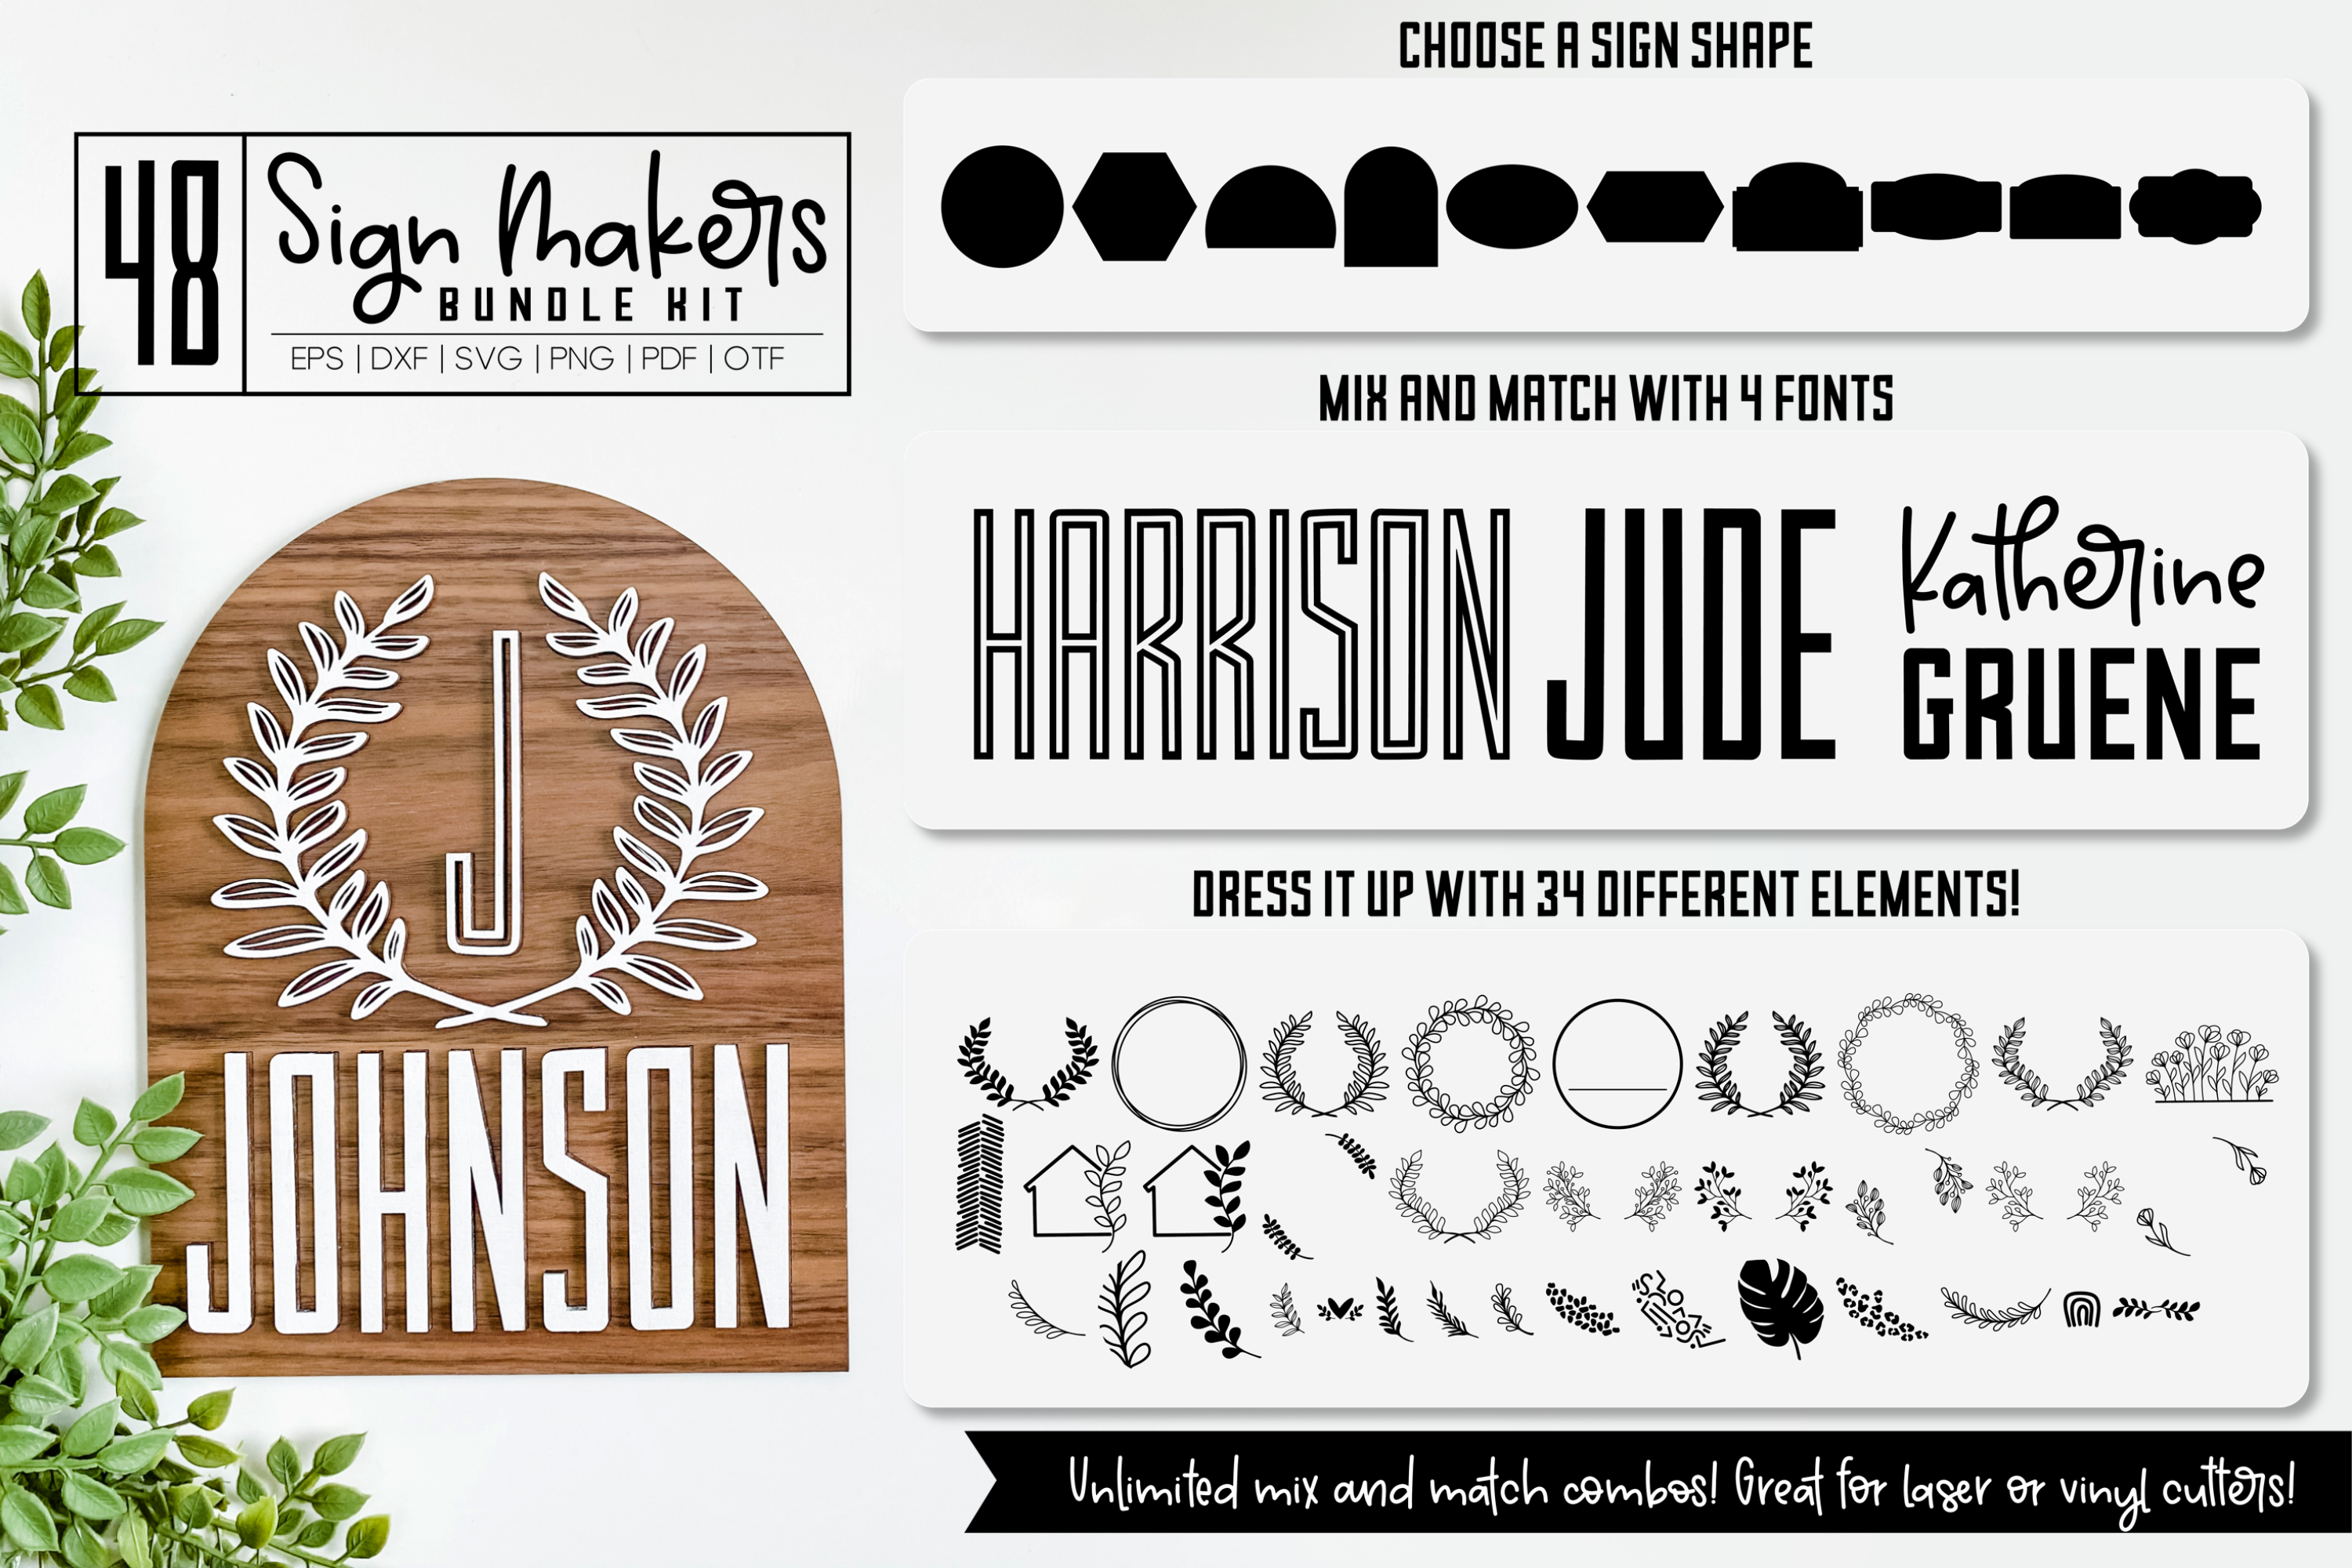 Sign Makers Creator Kit Bundle | 44 Elements and 4 Fonts